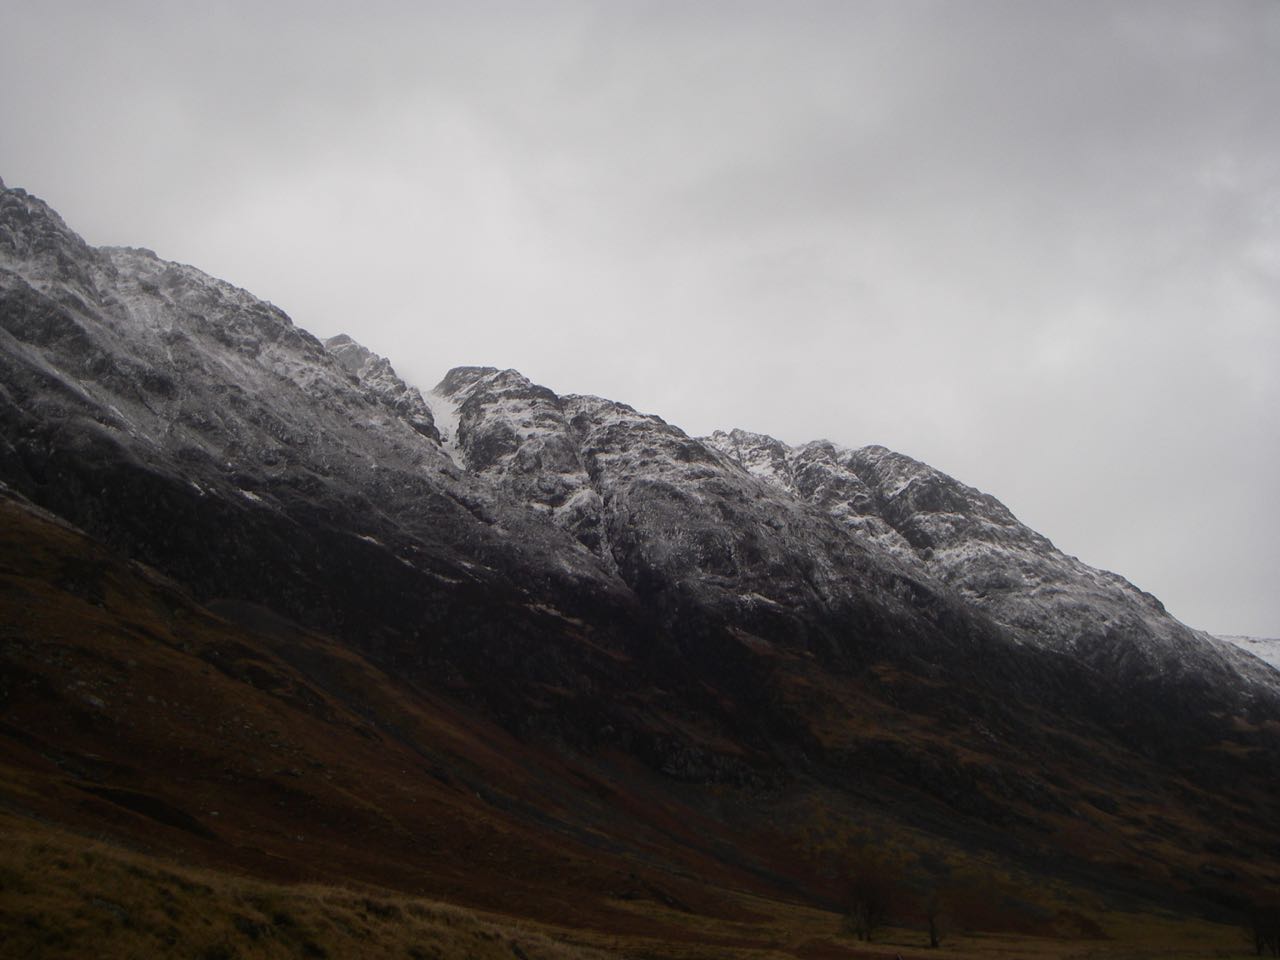 The South flank of the Aonach Eagach had lost some snow cover